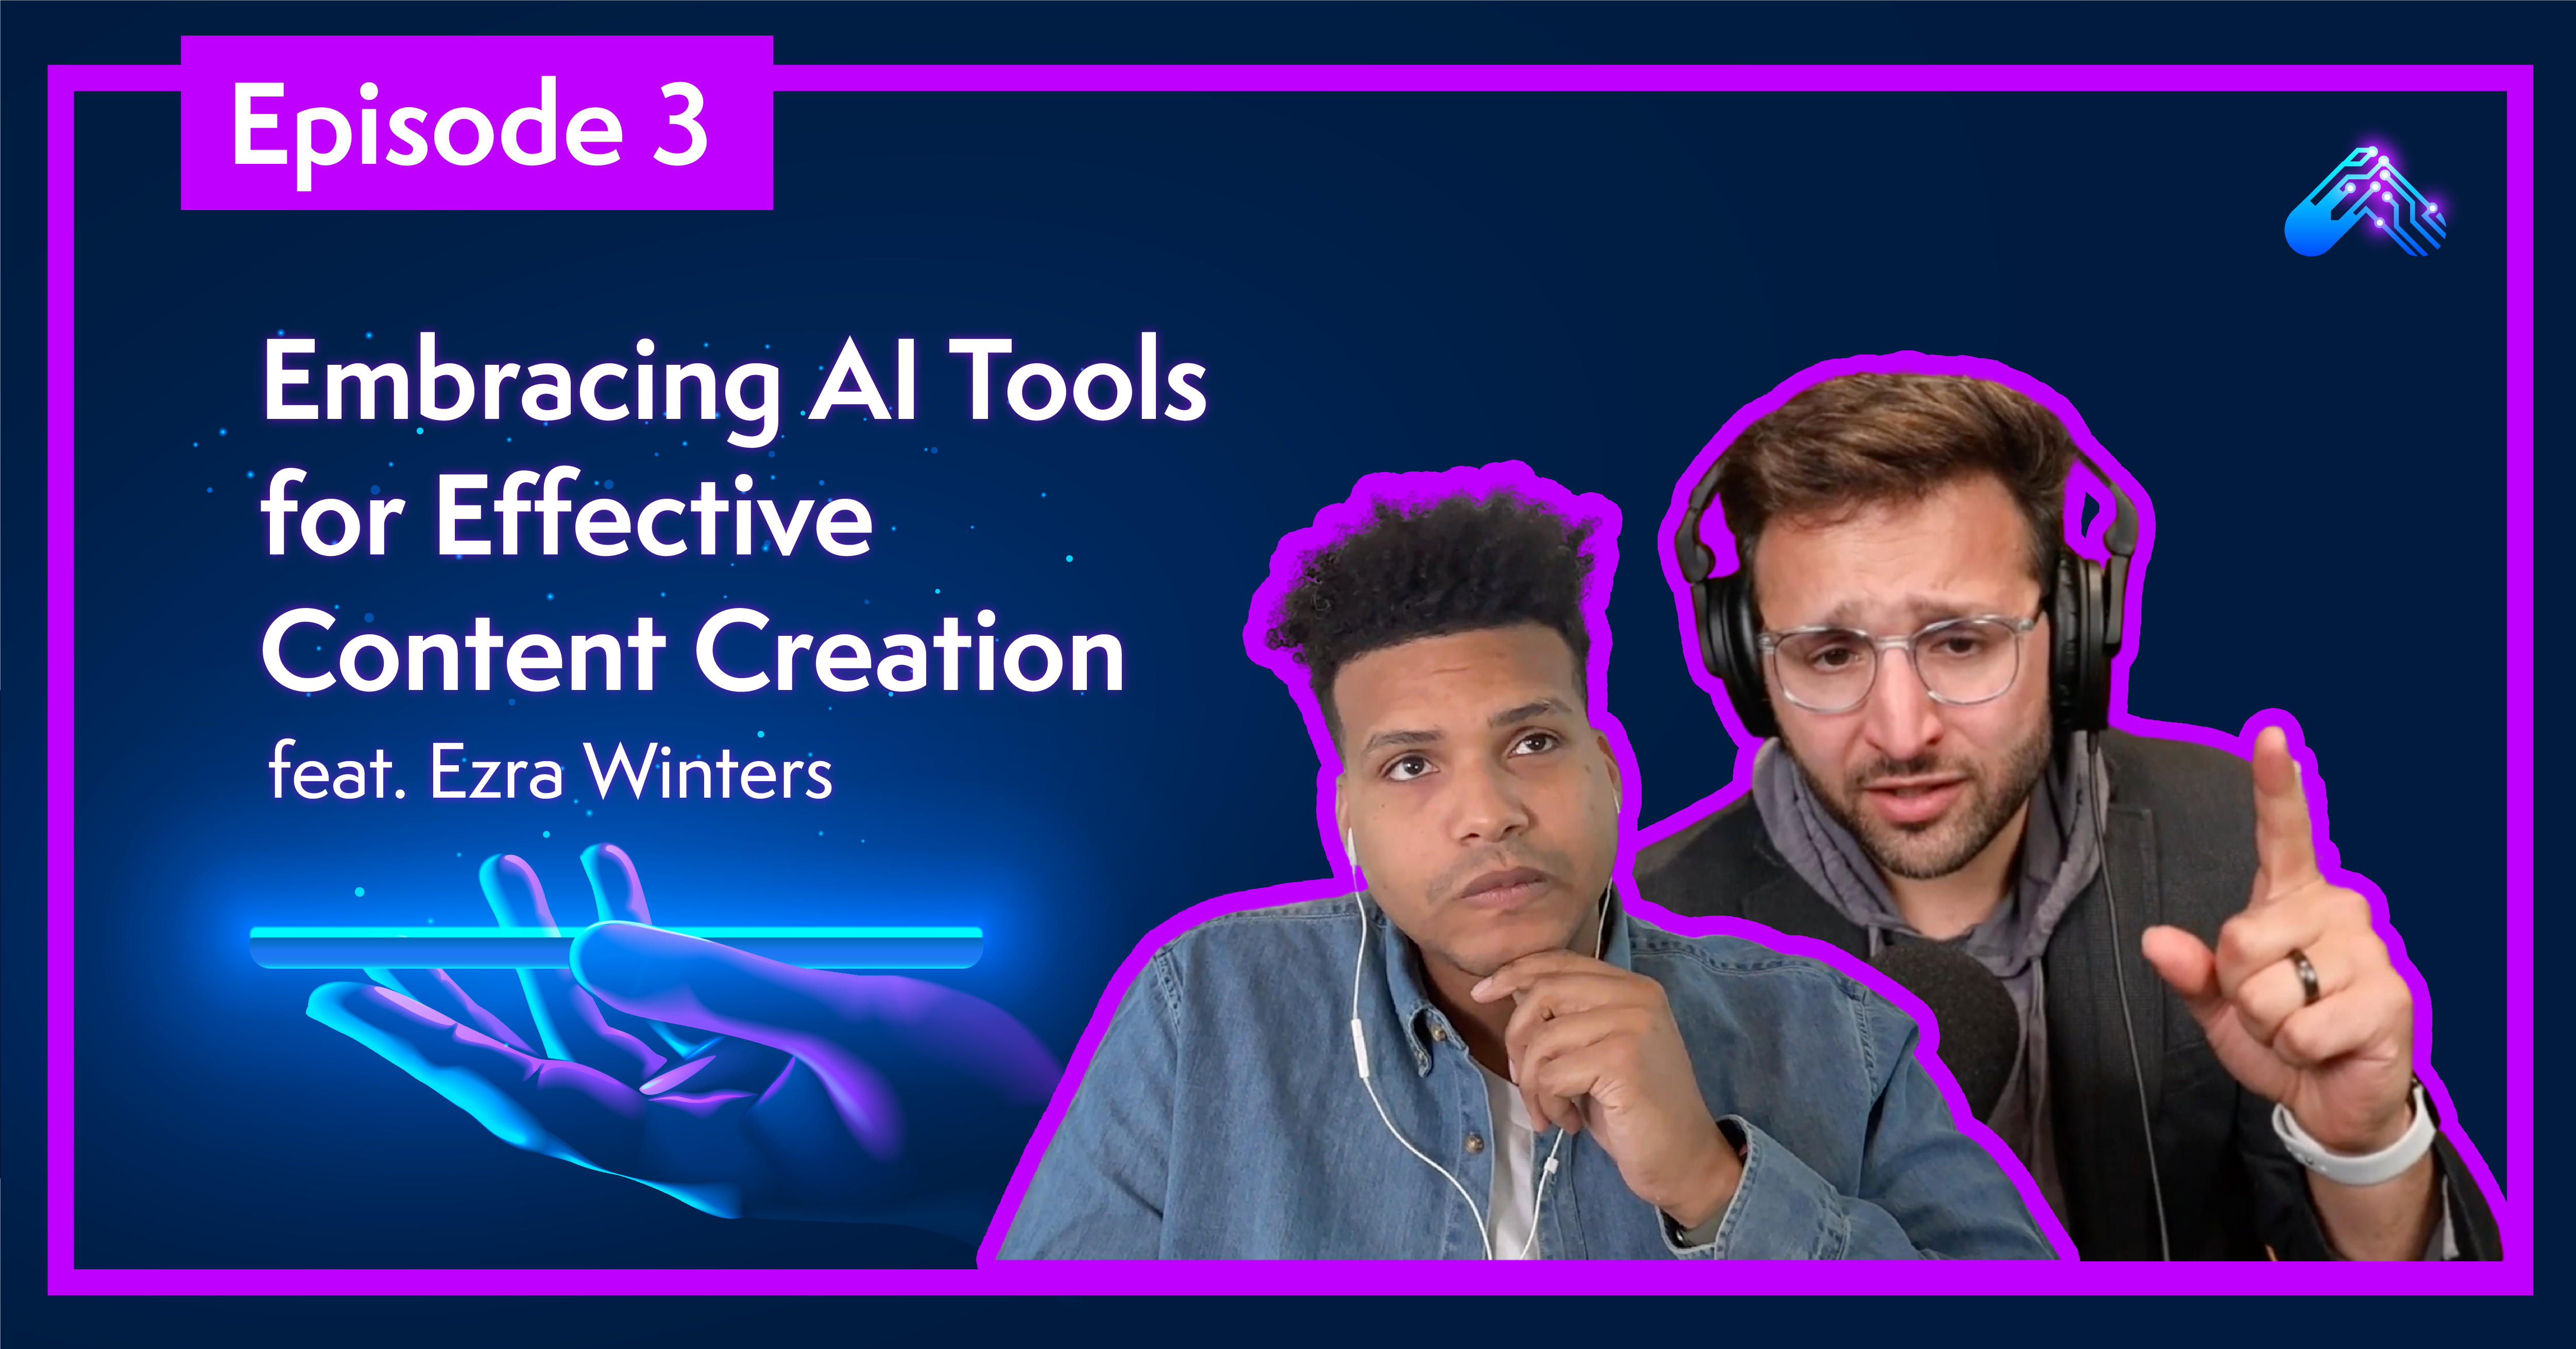 Embracing AI Tools for Effective Content Creation | AI Wave Podcast